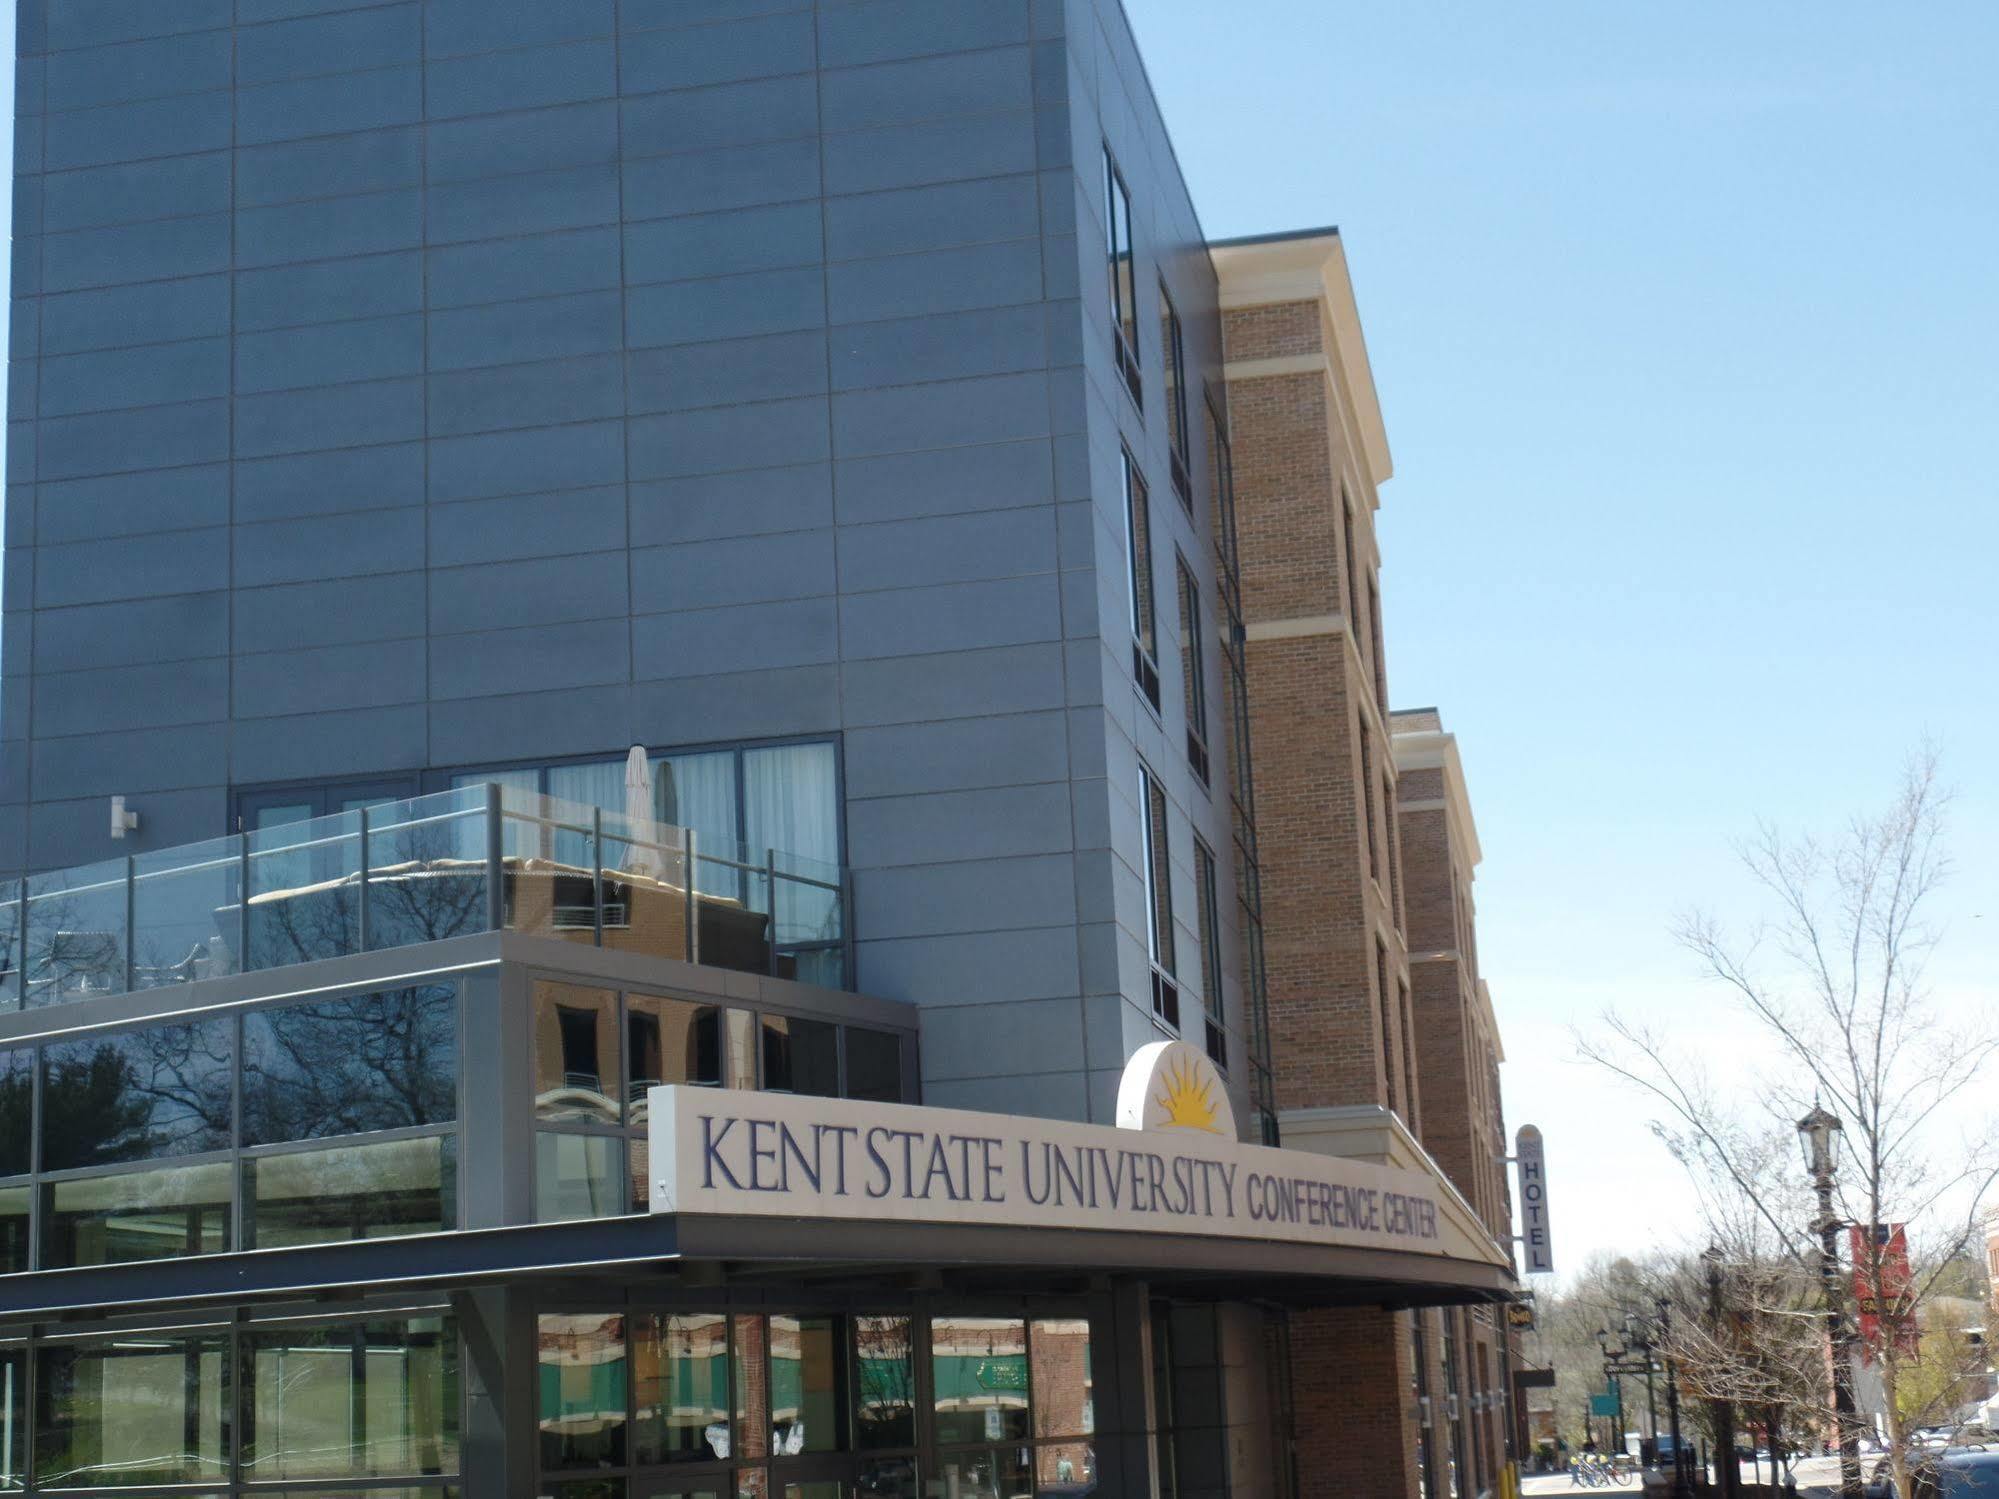 Kent State University Hotel And Conference Center Exterior foto